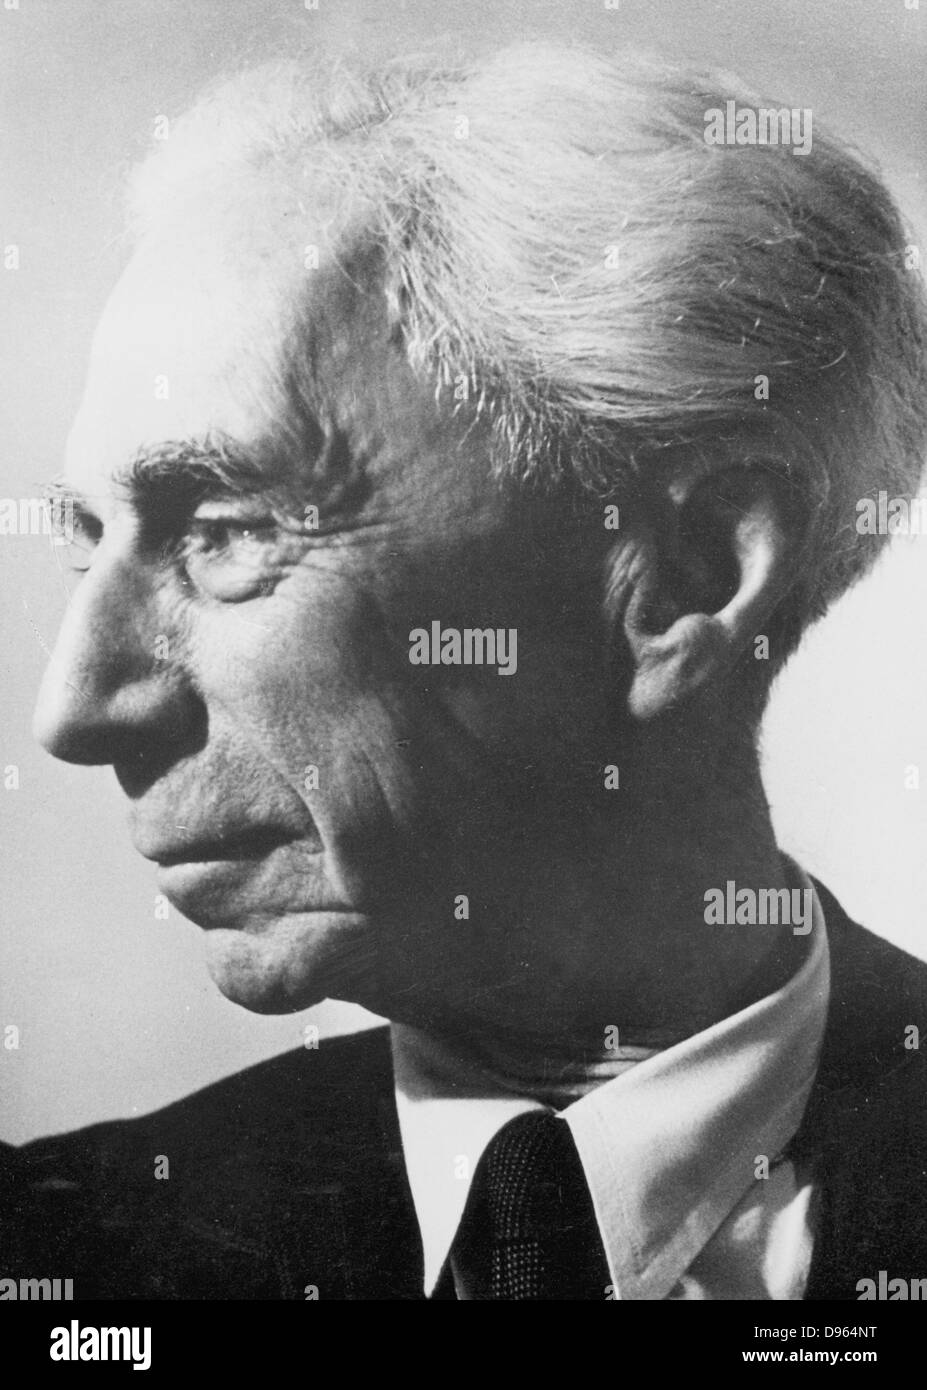 Bertrand Arthur William Russell, 3rd Earl Russell (1872-1970). British philosopher and mathematician. Nobel prize for literature 1950. PHOTOGRAPH COURTESY OF THE NOBEL FOUNDATION Stock Photo